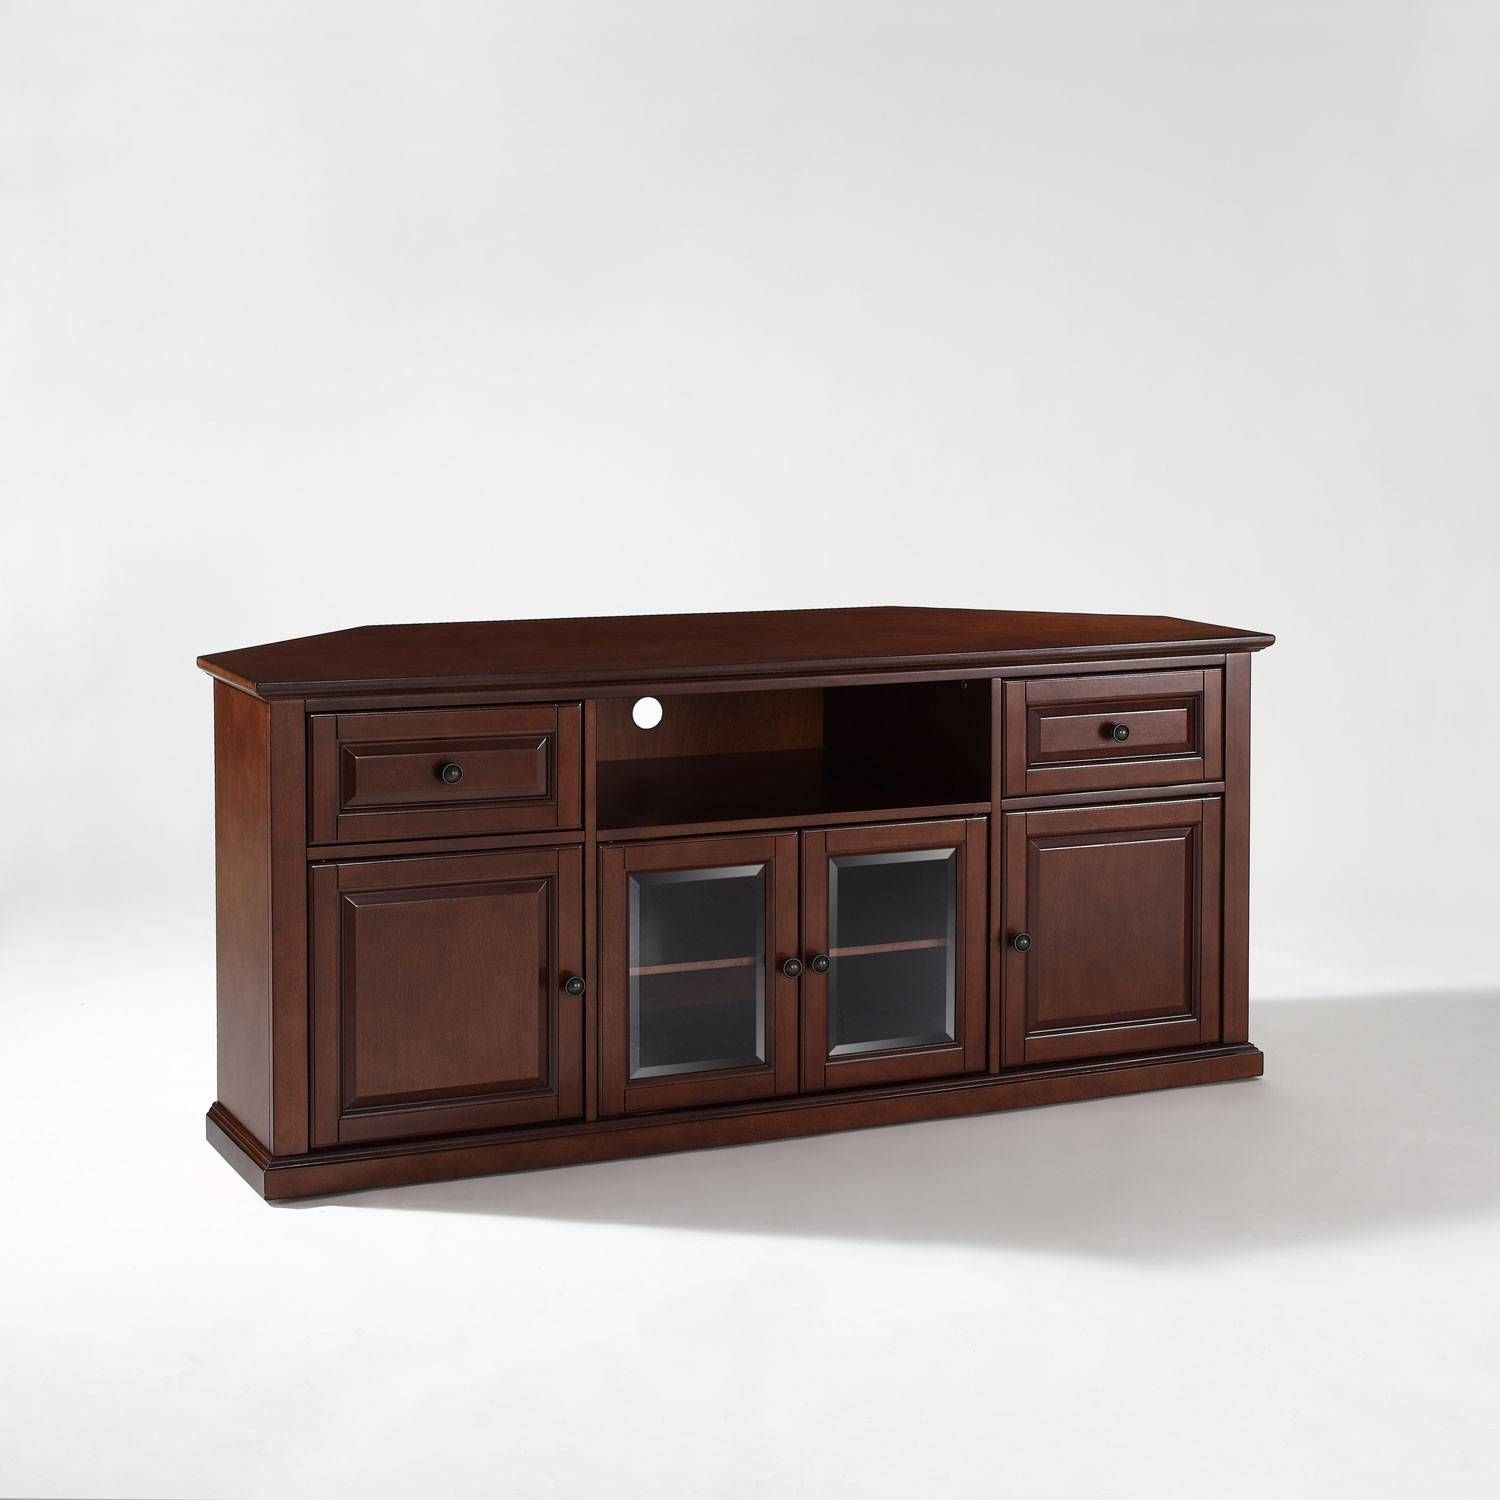 Tv Stands & Cabinets On Sale | Bellacor Intended For 24 Inch Corner Tv Stands (View 1 of 15)